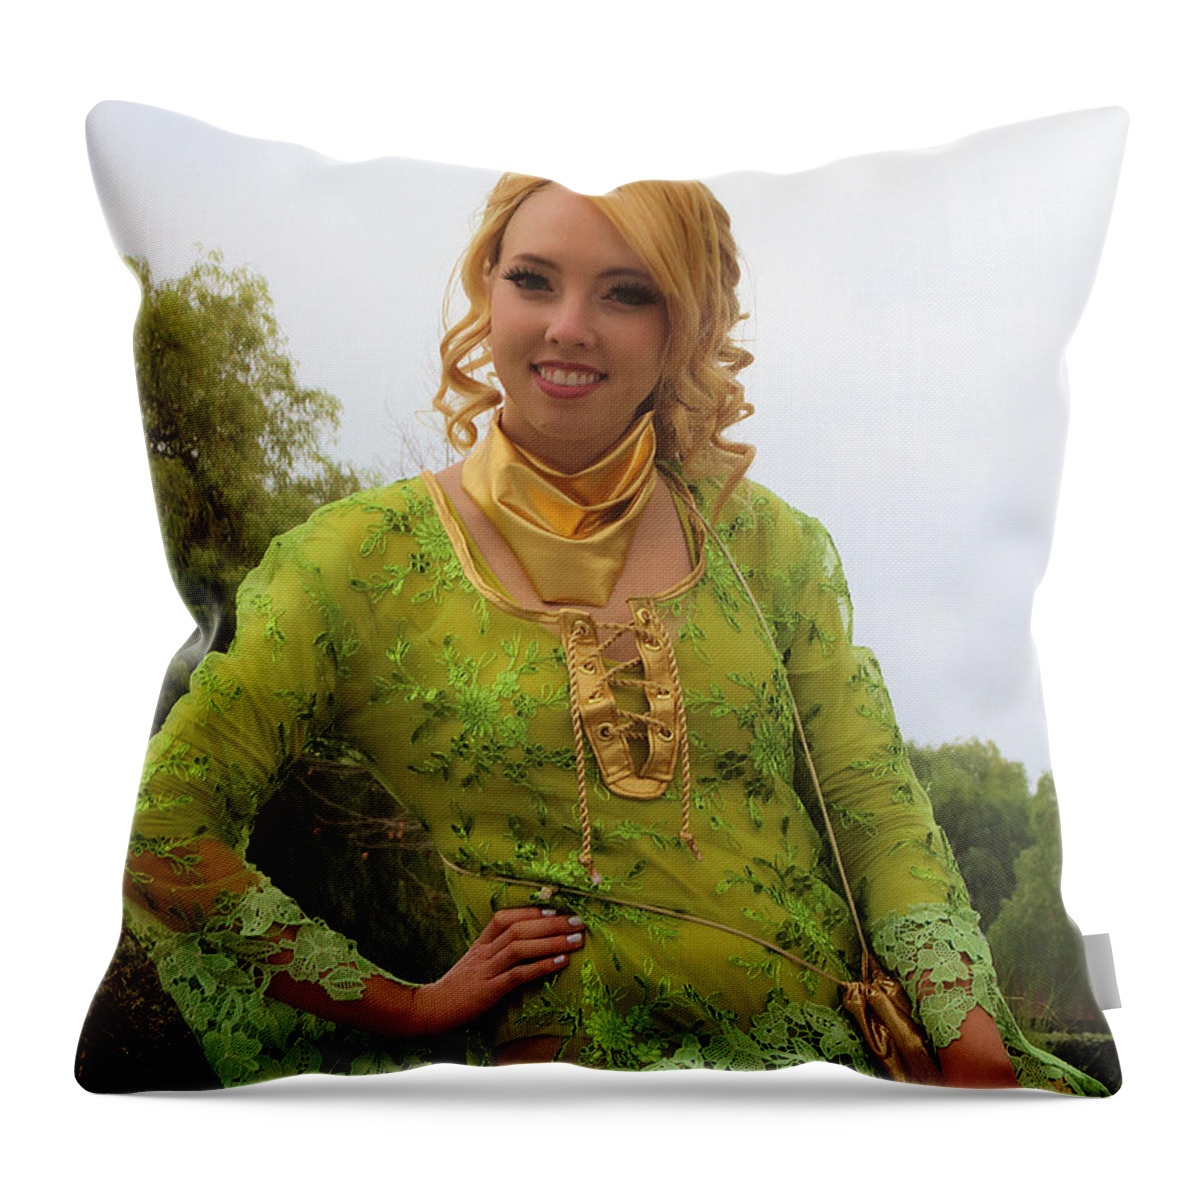 Kelly Throw Pillow featuring the photograph Kelly by Viktor Savchenko